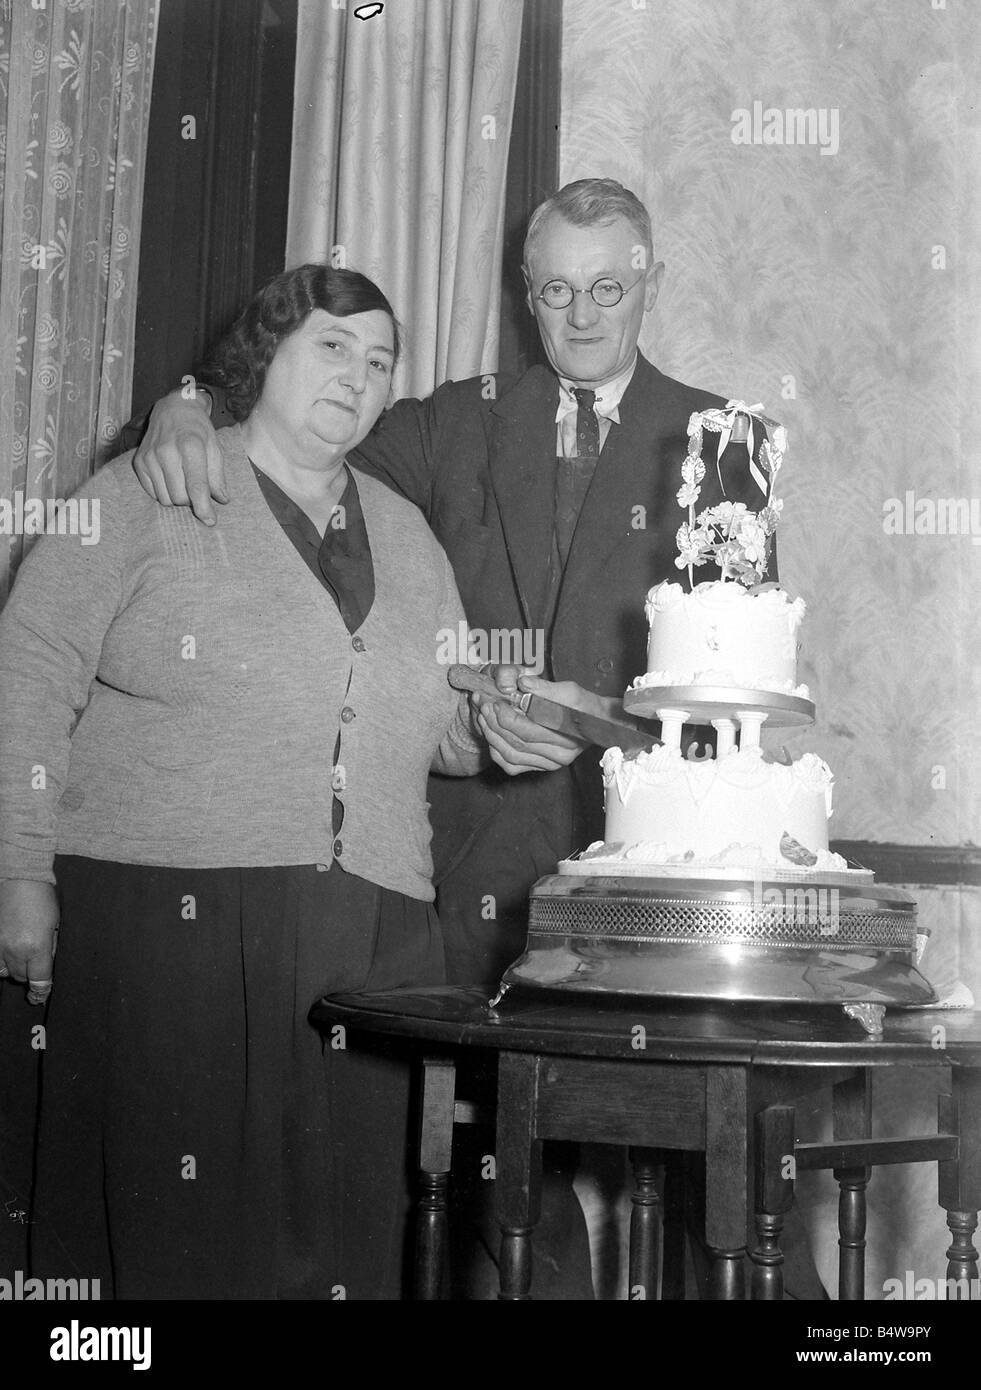 The happy couple cut the wedding cake at the reception 1949 Stock Photo